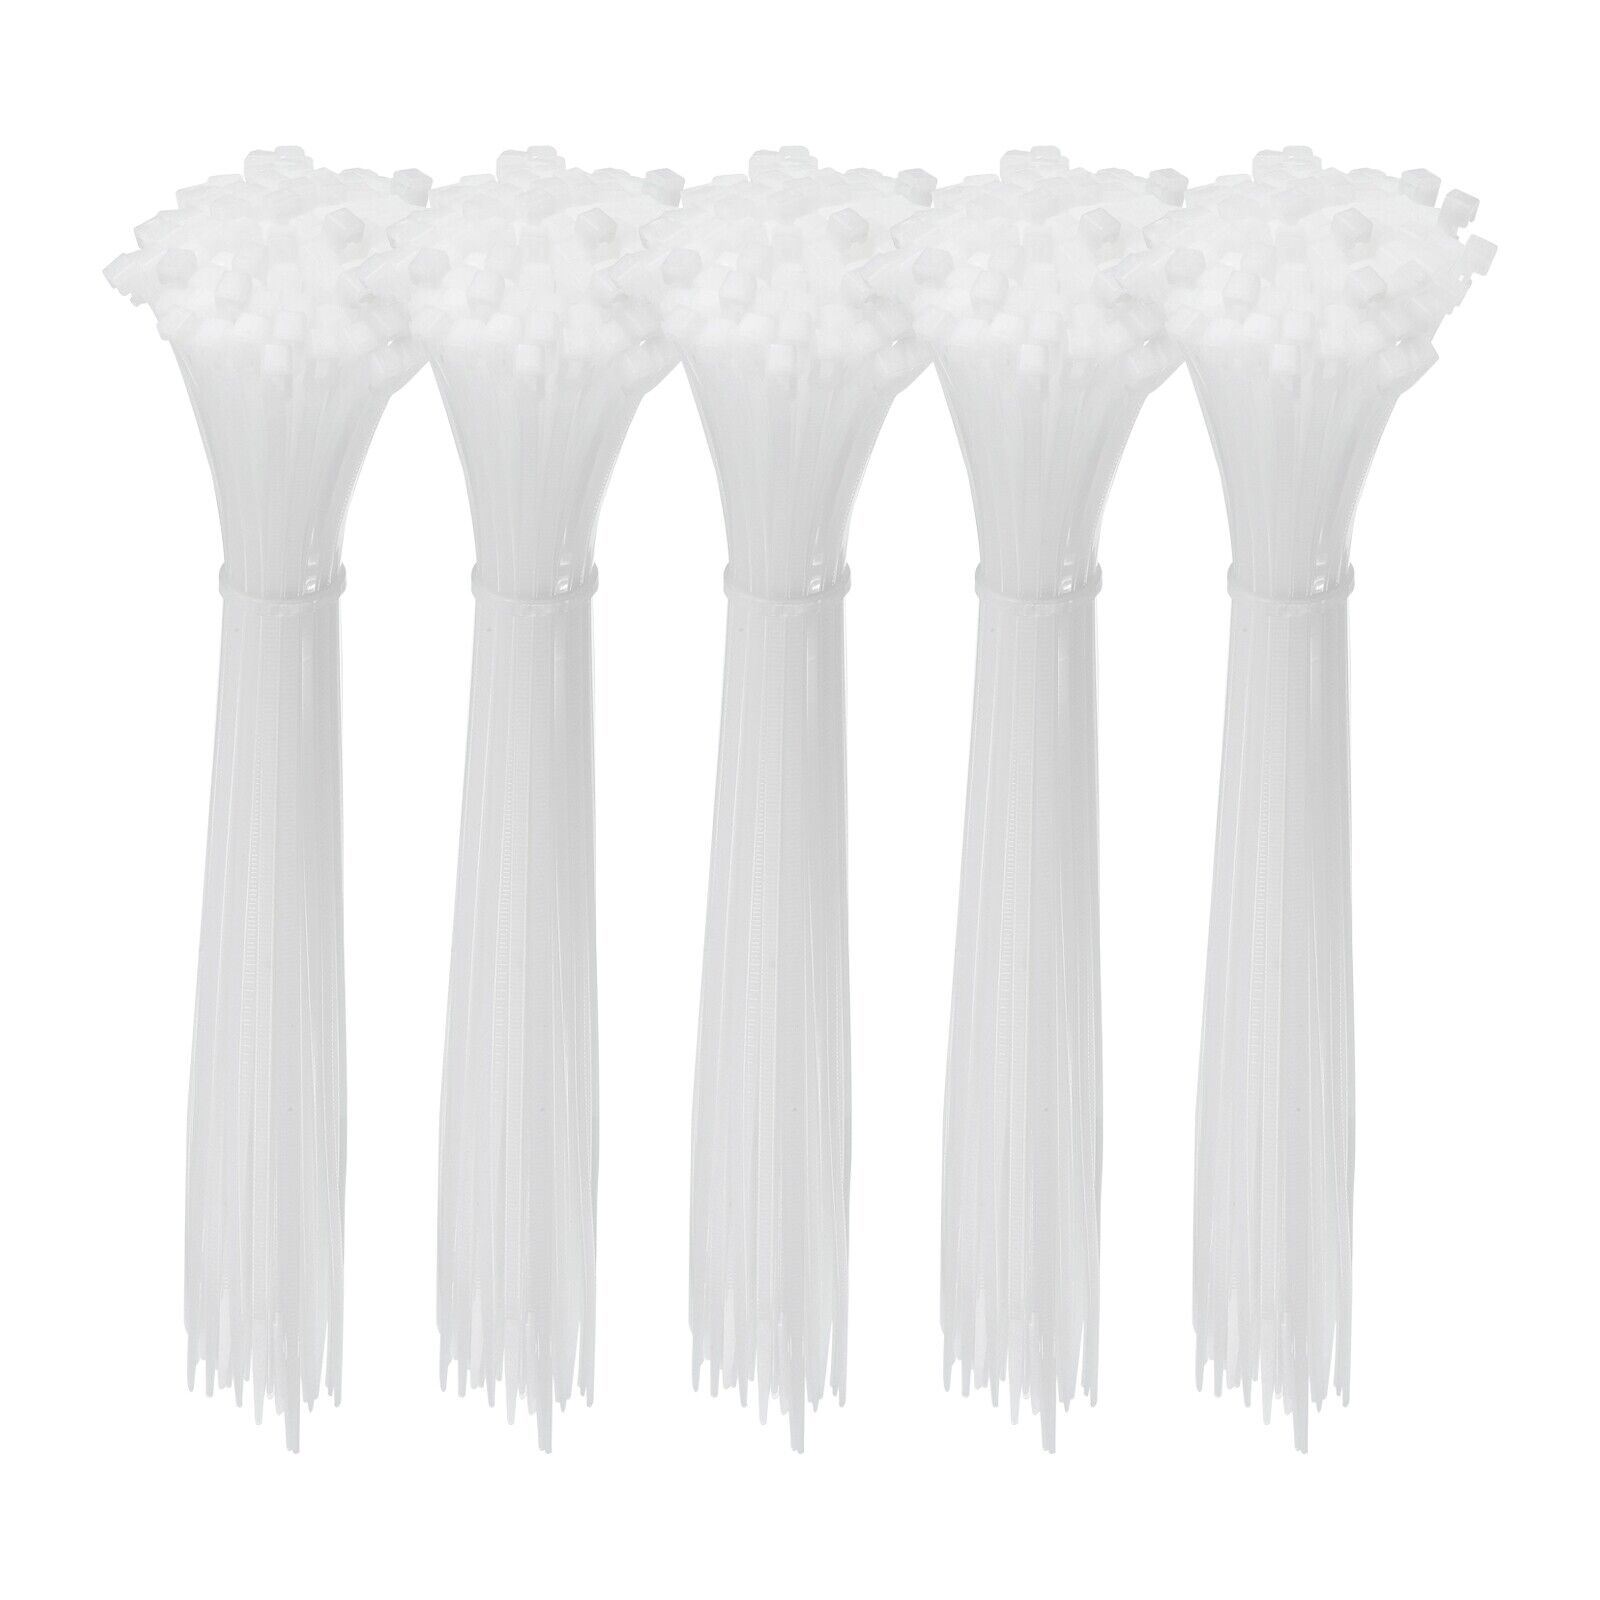 10 Inch  Releasable Cable Ties Adjustable Zip Ties White 500Pcs